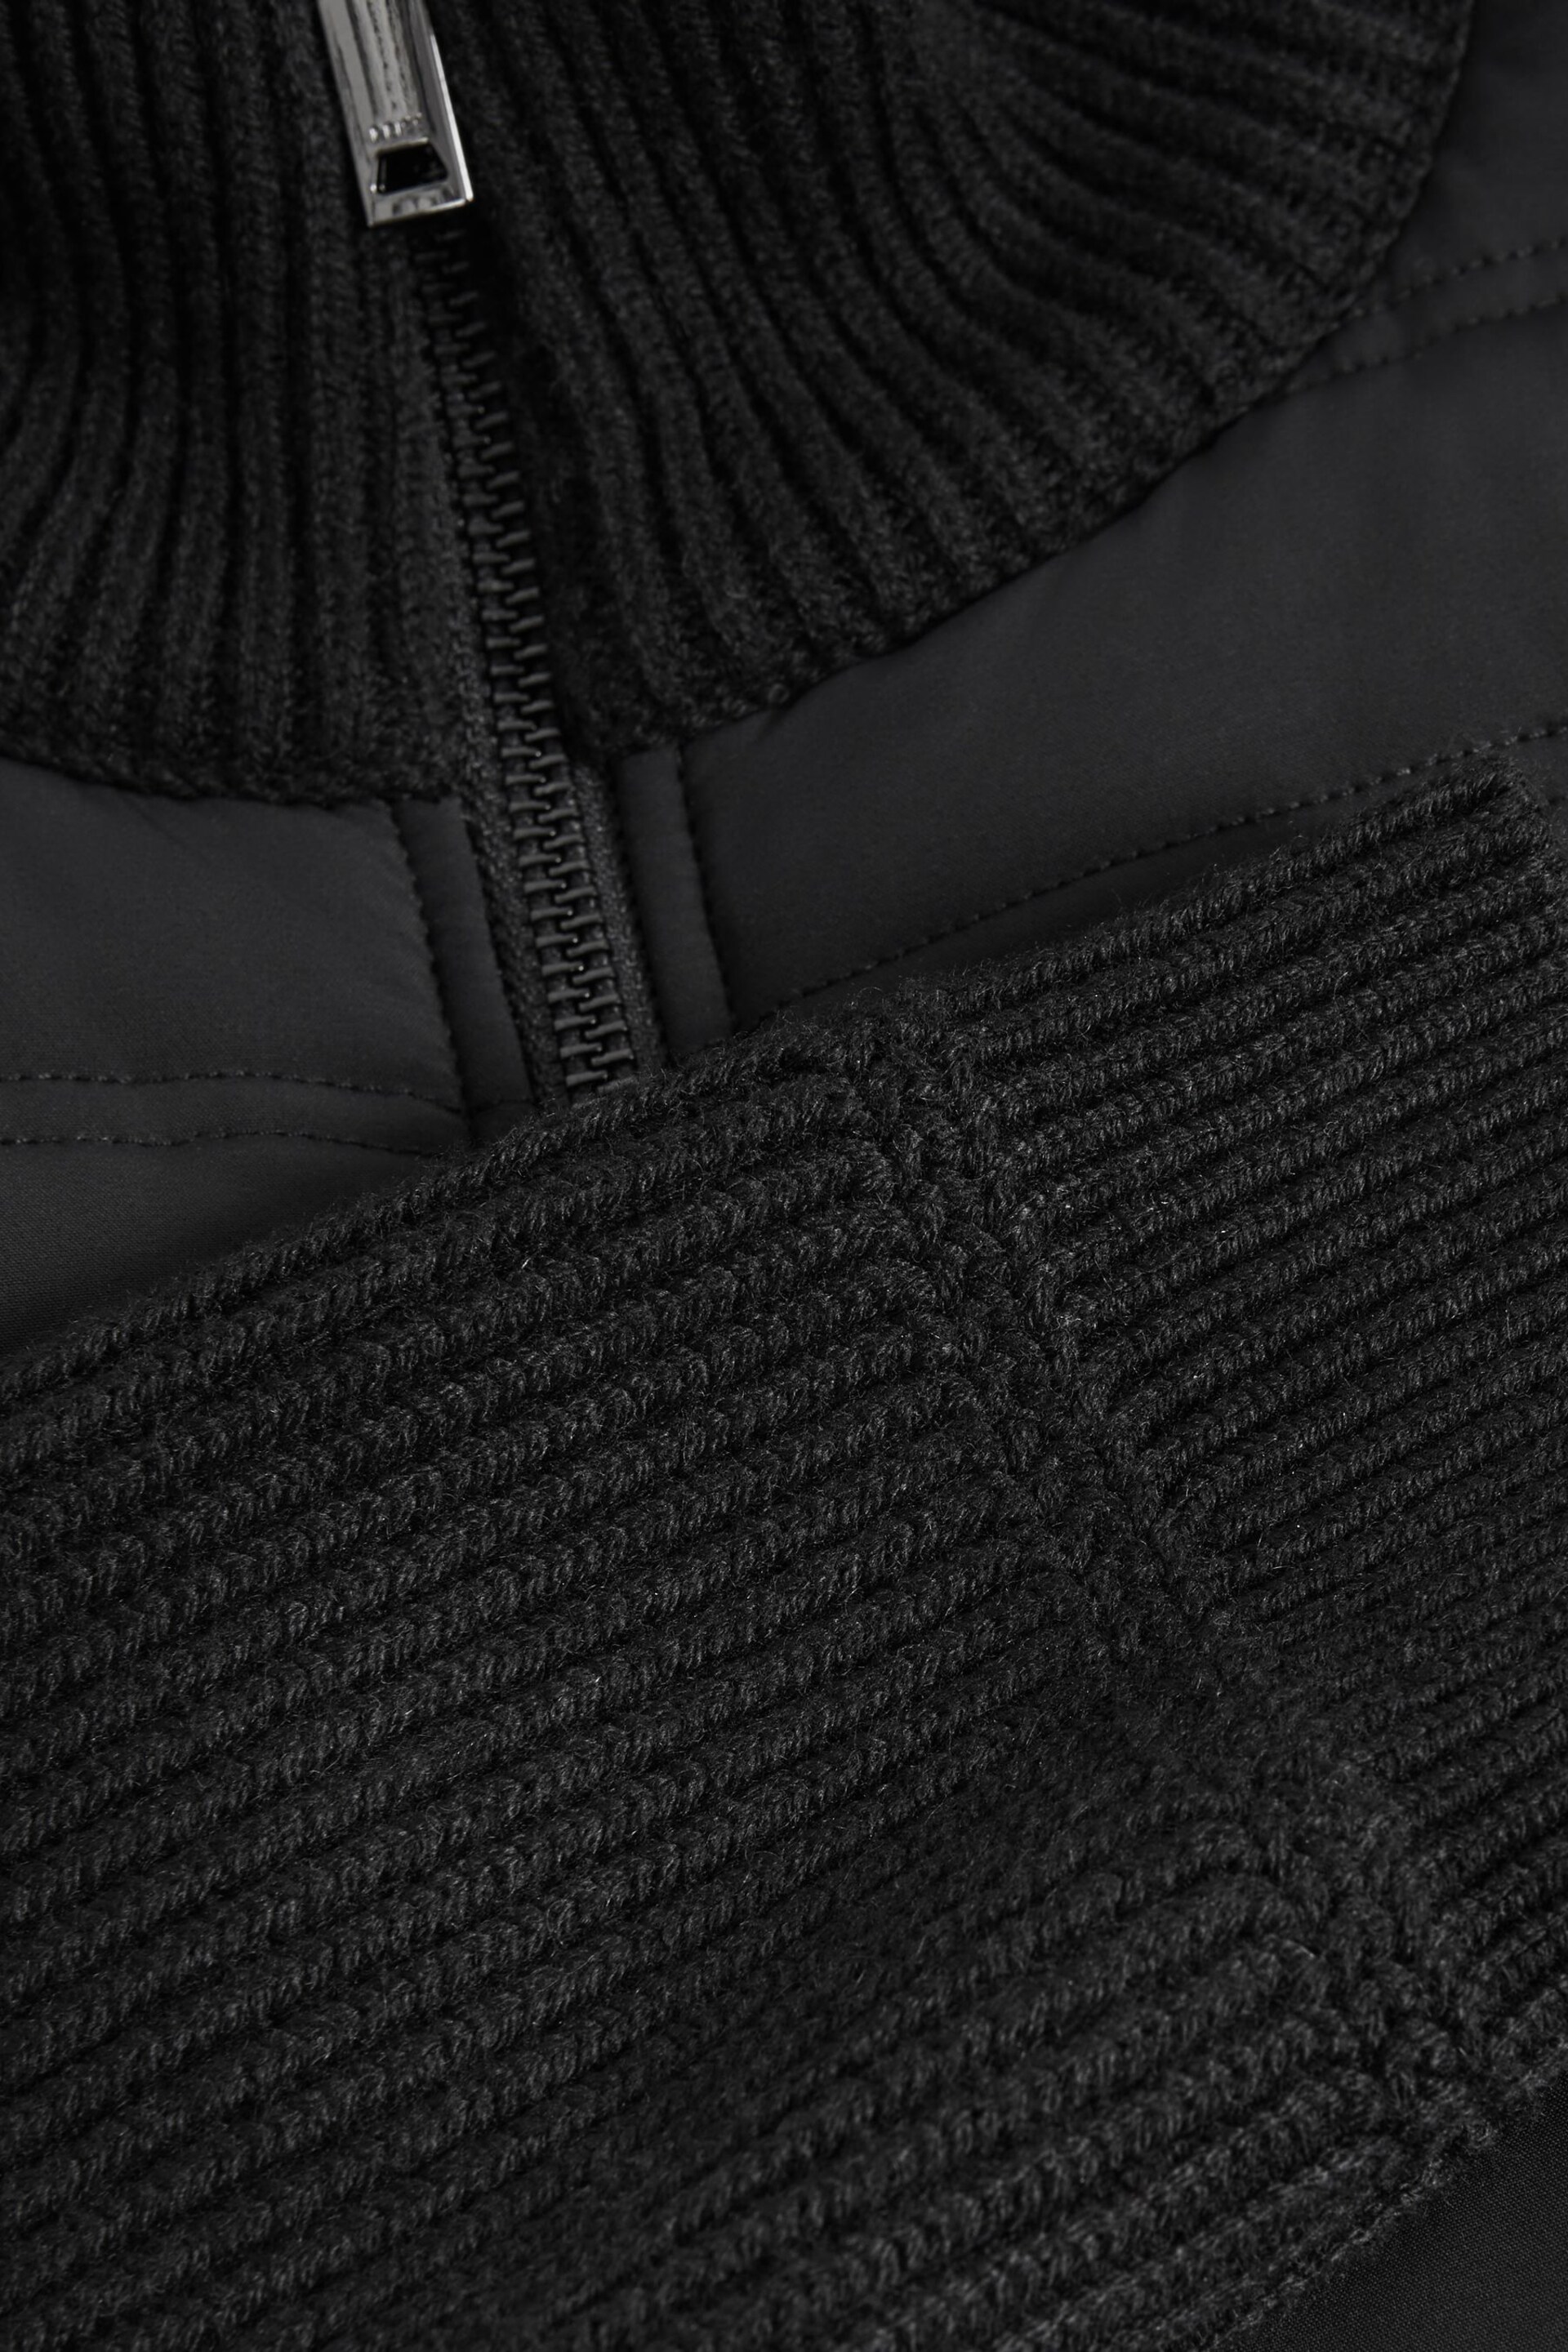 Reiss Black Southend Hybrid Quilt and Knit Zip-Through Jacket - Image 7 of 8